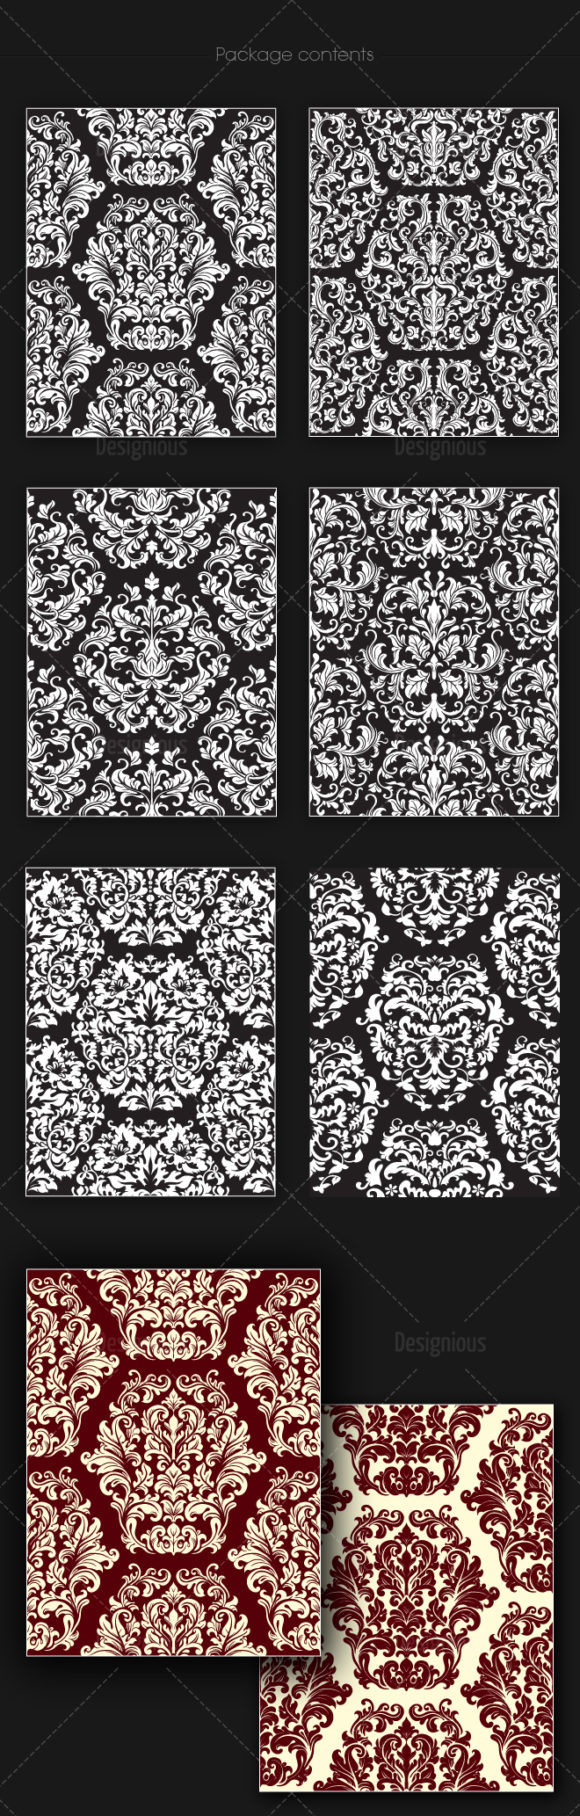 Seamless Patterns Vector Pack 144 2